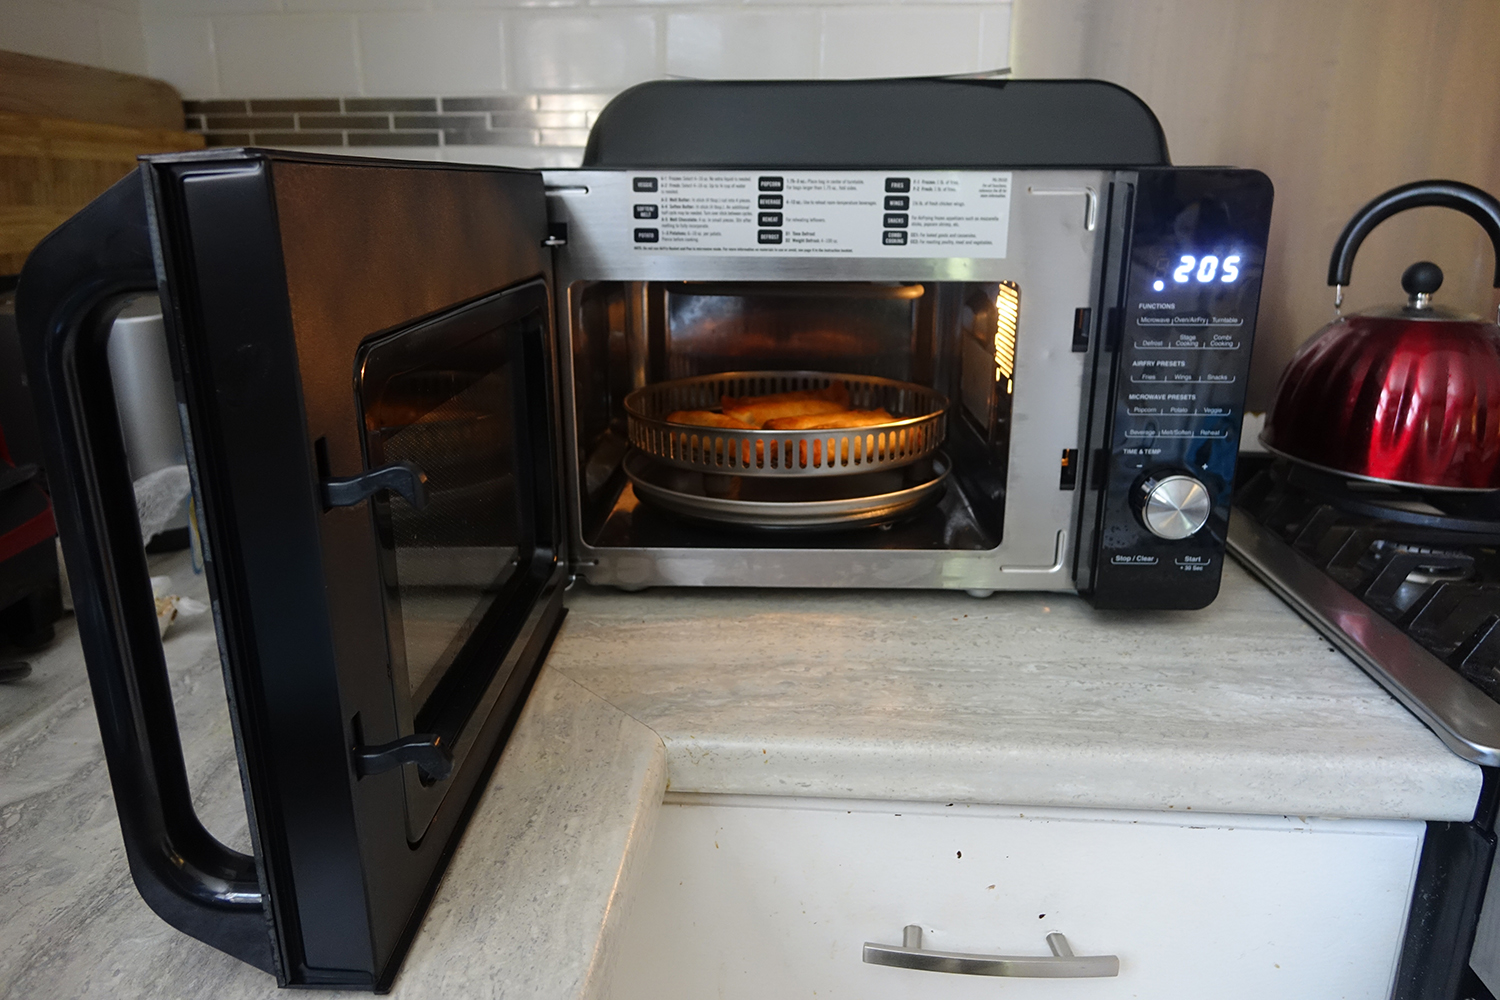 Cuisinart 3-in-1 is a multifunction appliance that's an air fryer, toaster, convection oven on the counter.